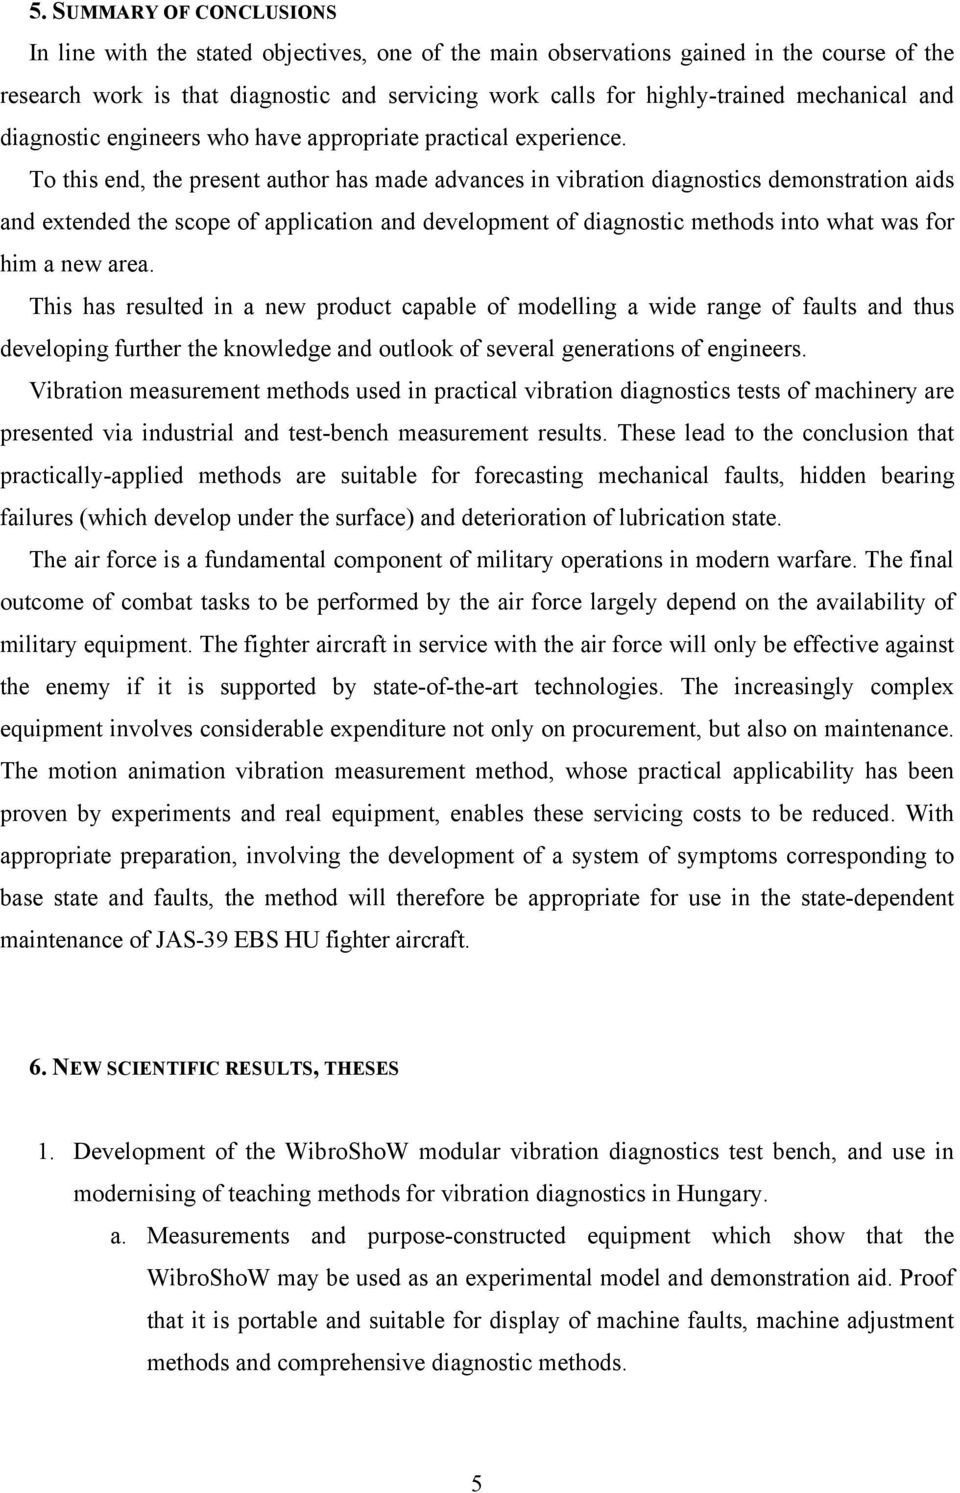 To this end, the present author has made advances in vibration diagnostics demonstration aids and extended the scope of application and development of diagnostic methods into what was for him a new